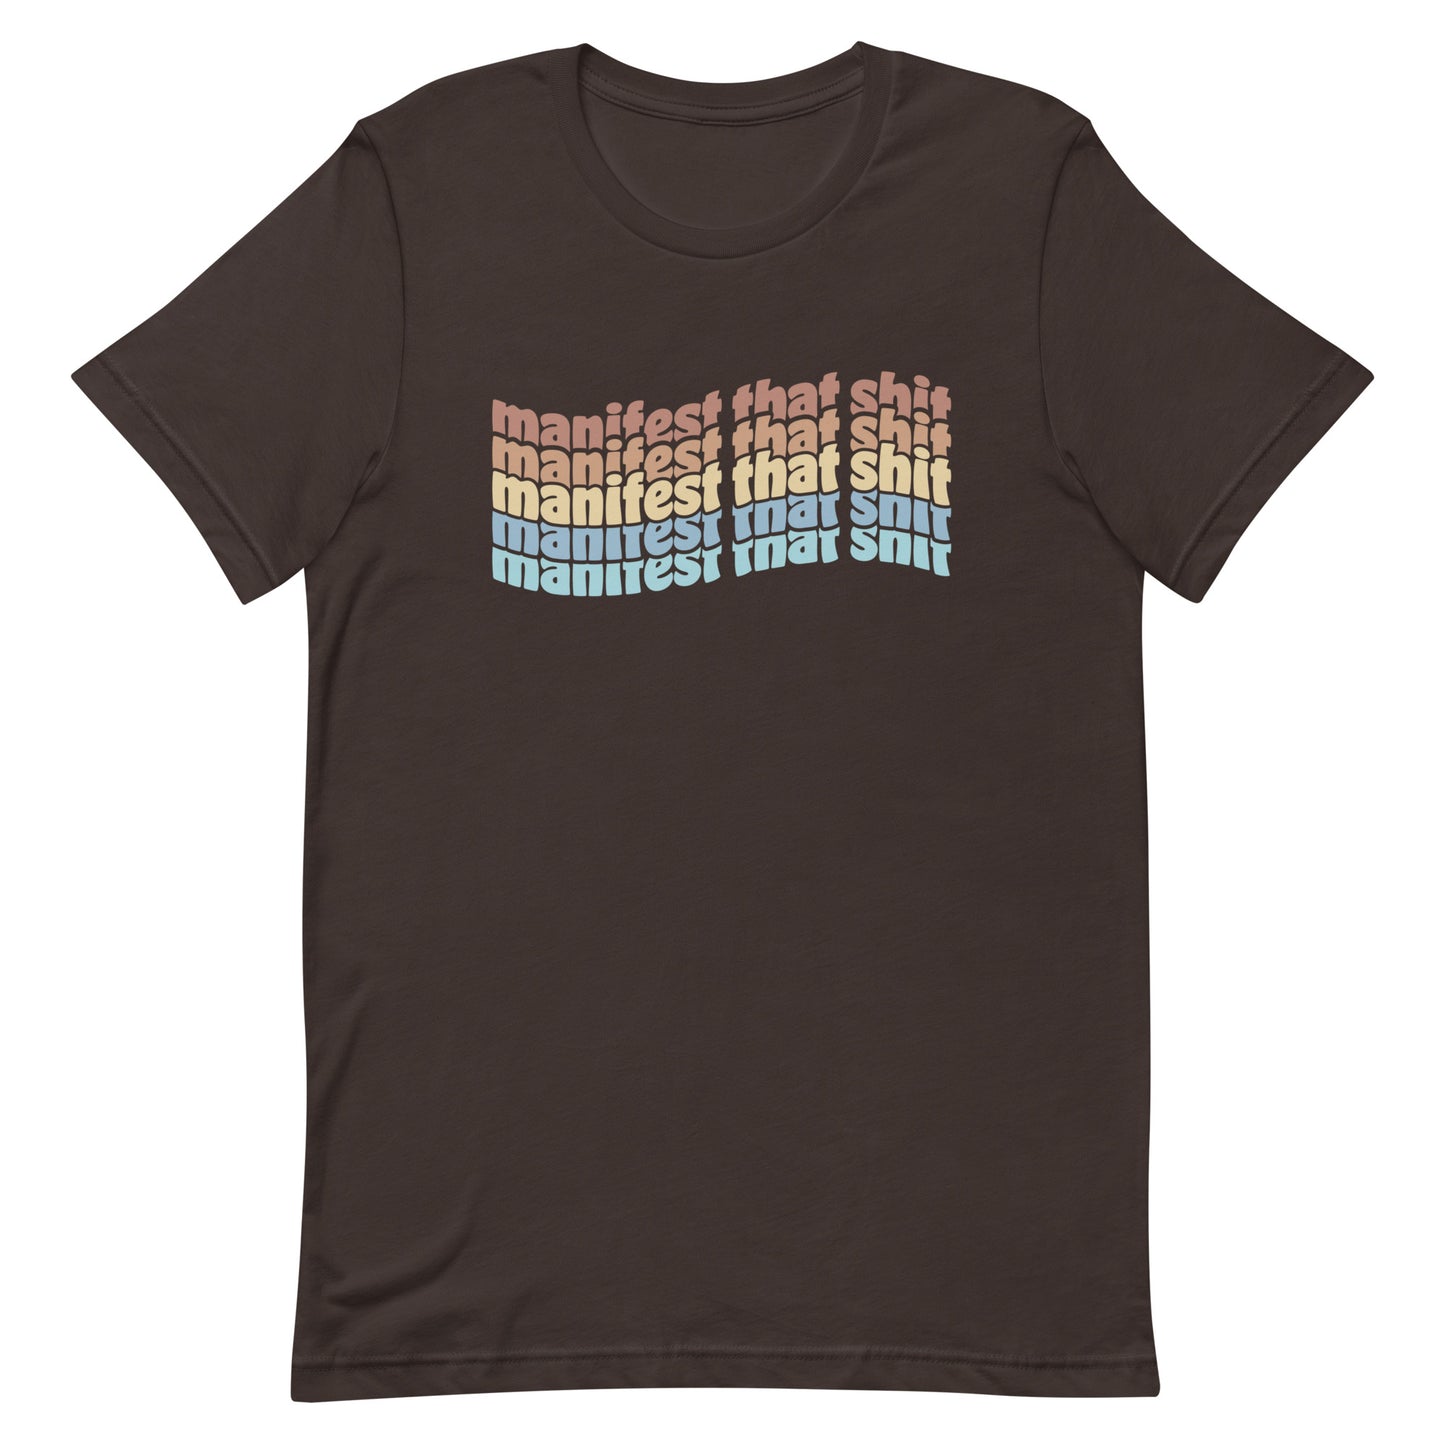 A brown crewneck t-shirt featuring stacked text that reads "manifest that shit" in a rainbow of colors.